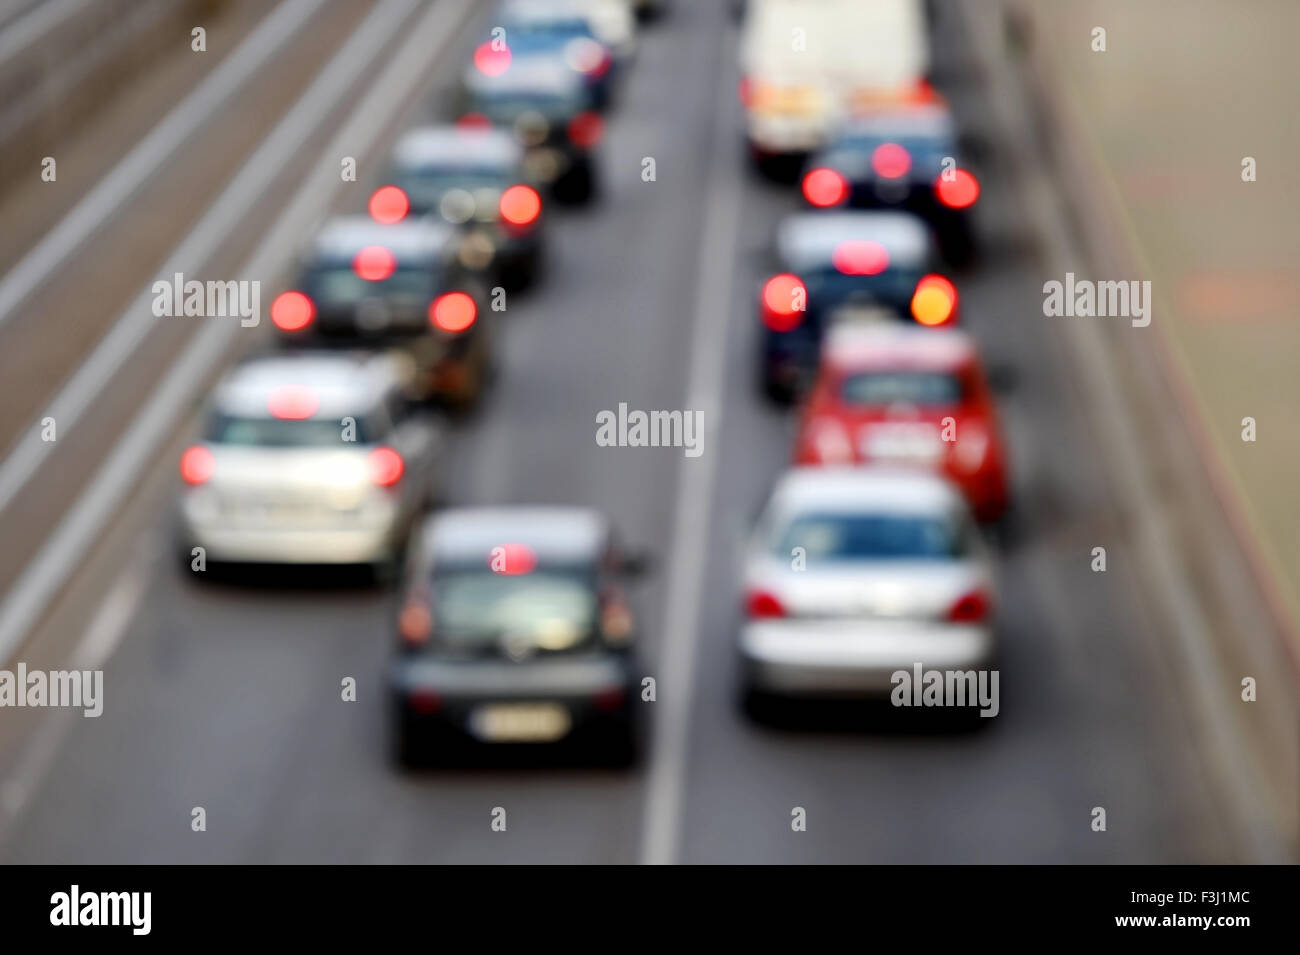 Blur shot of urban rush hour scene with multiple cars in a traffic congestion Stock Photo